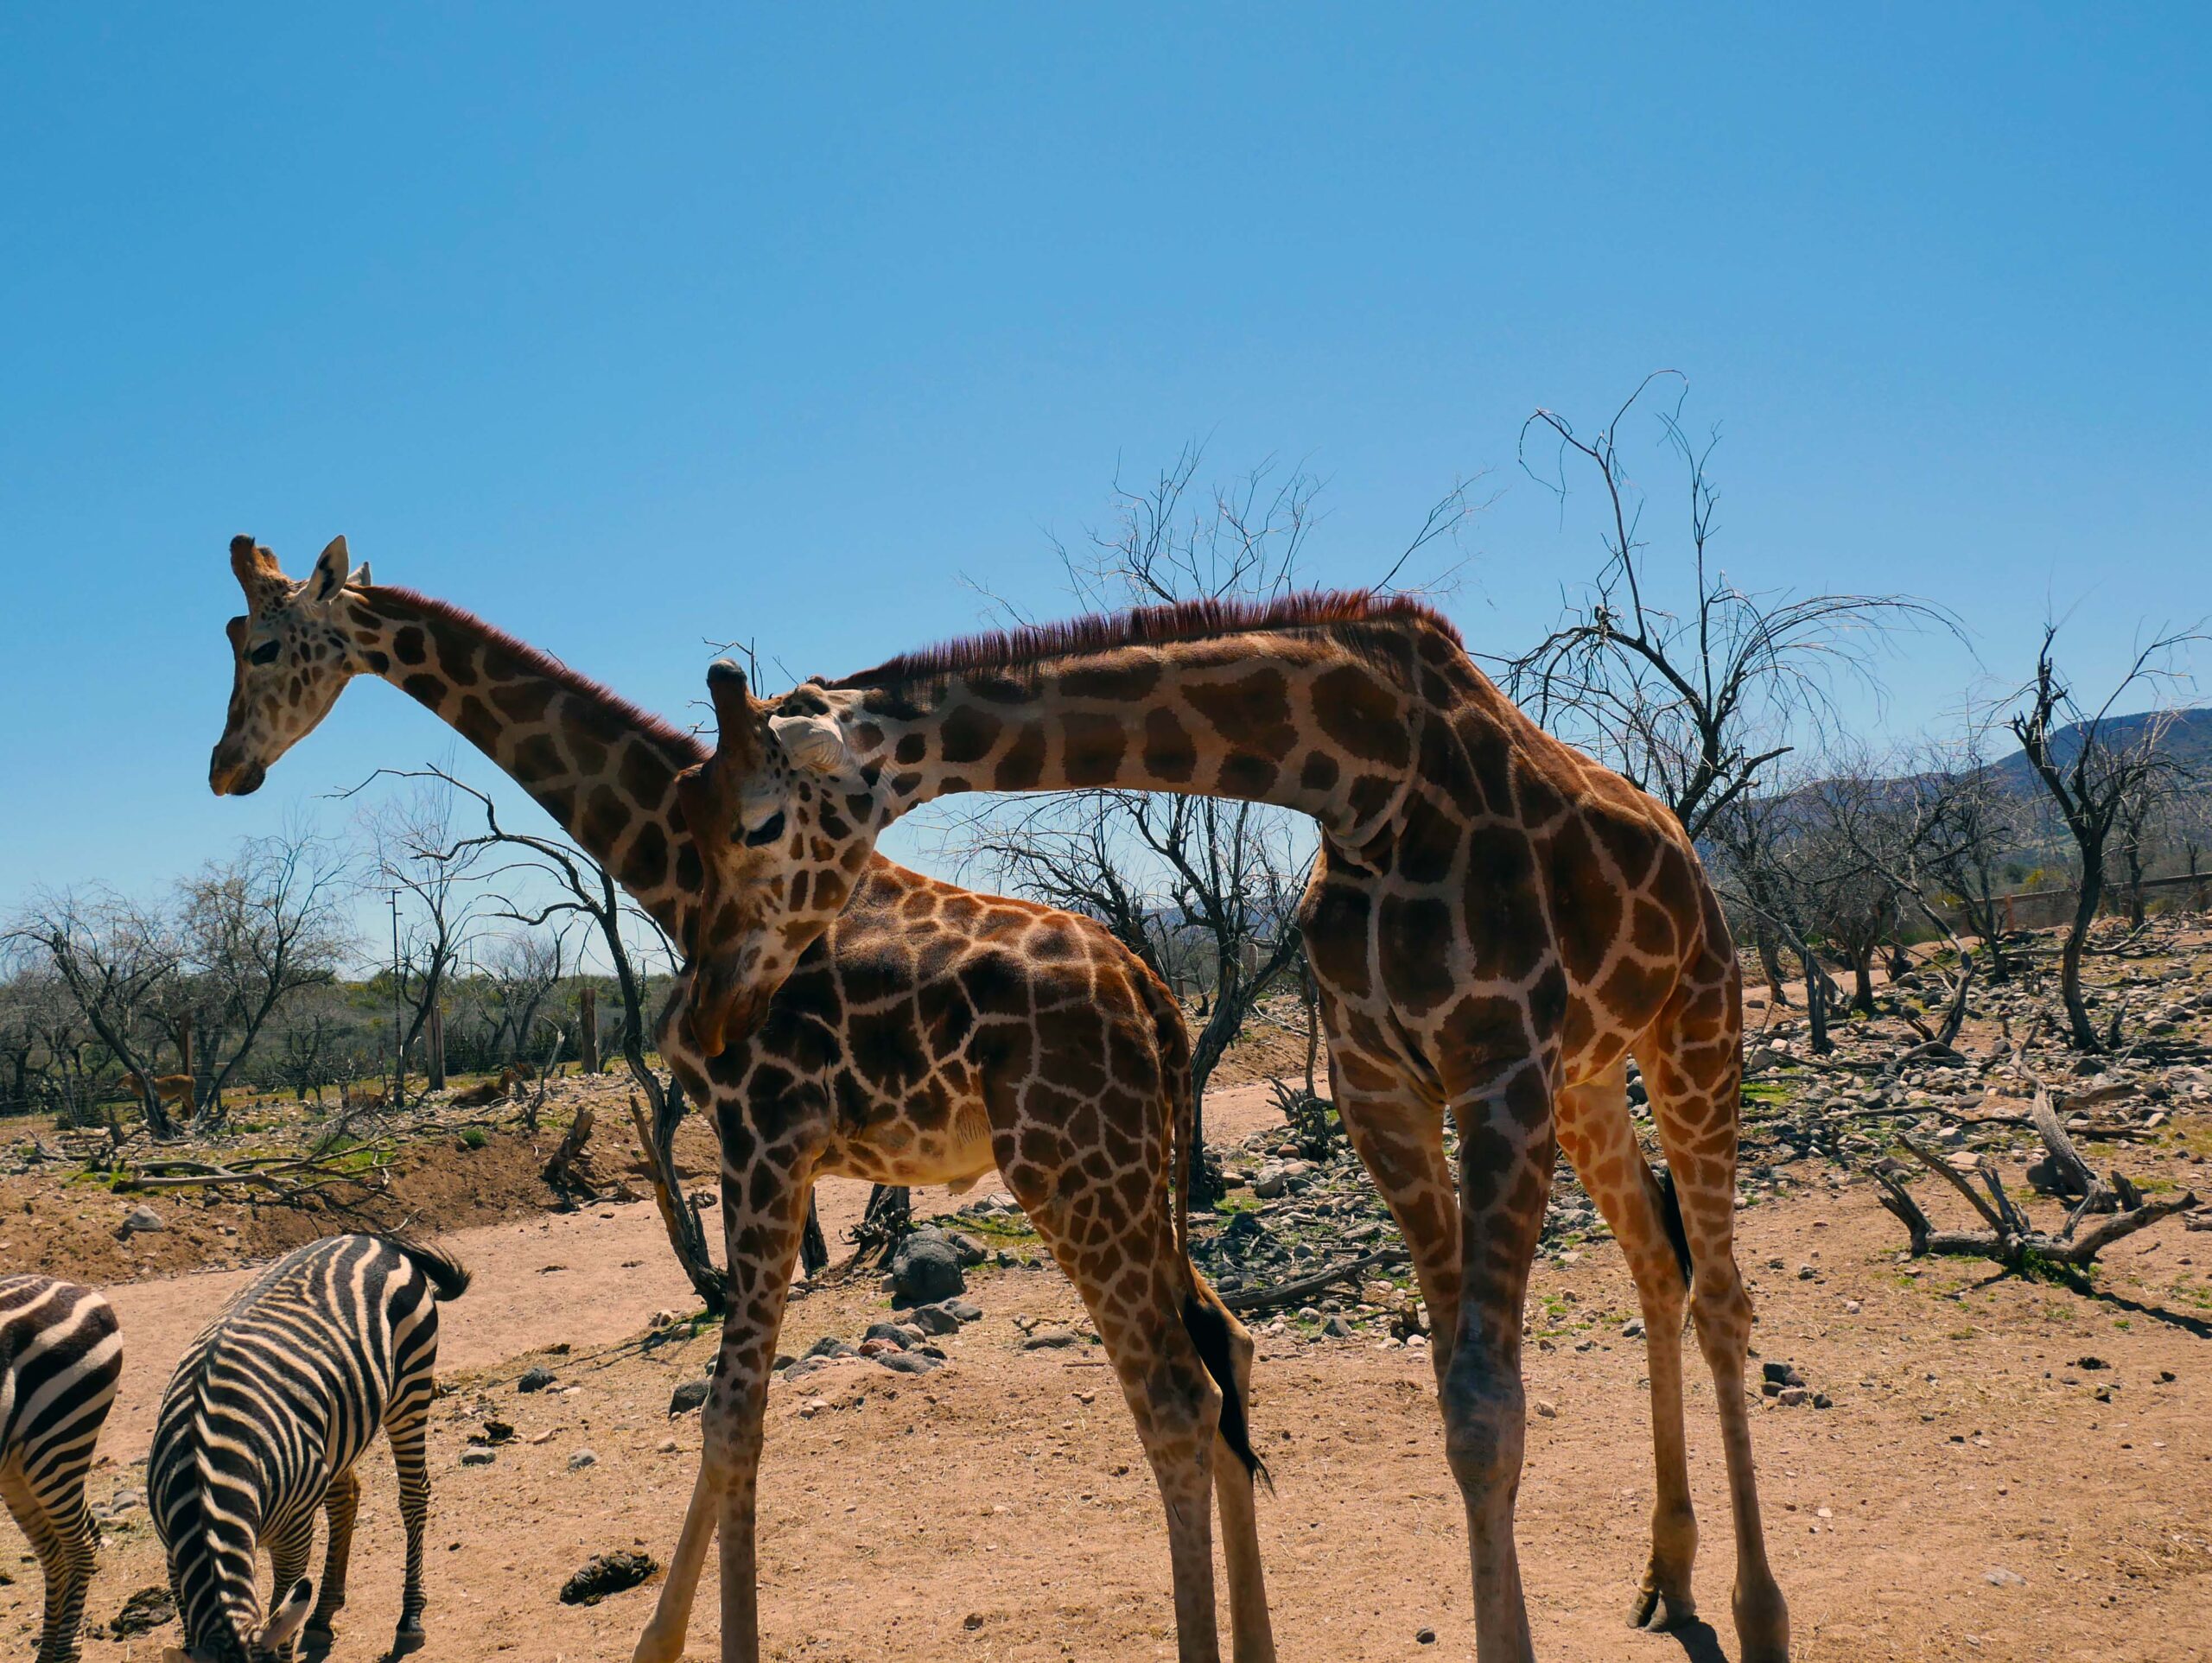 What are 10 interesting facts about giraffes?